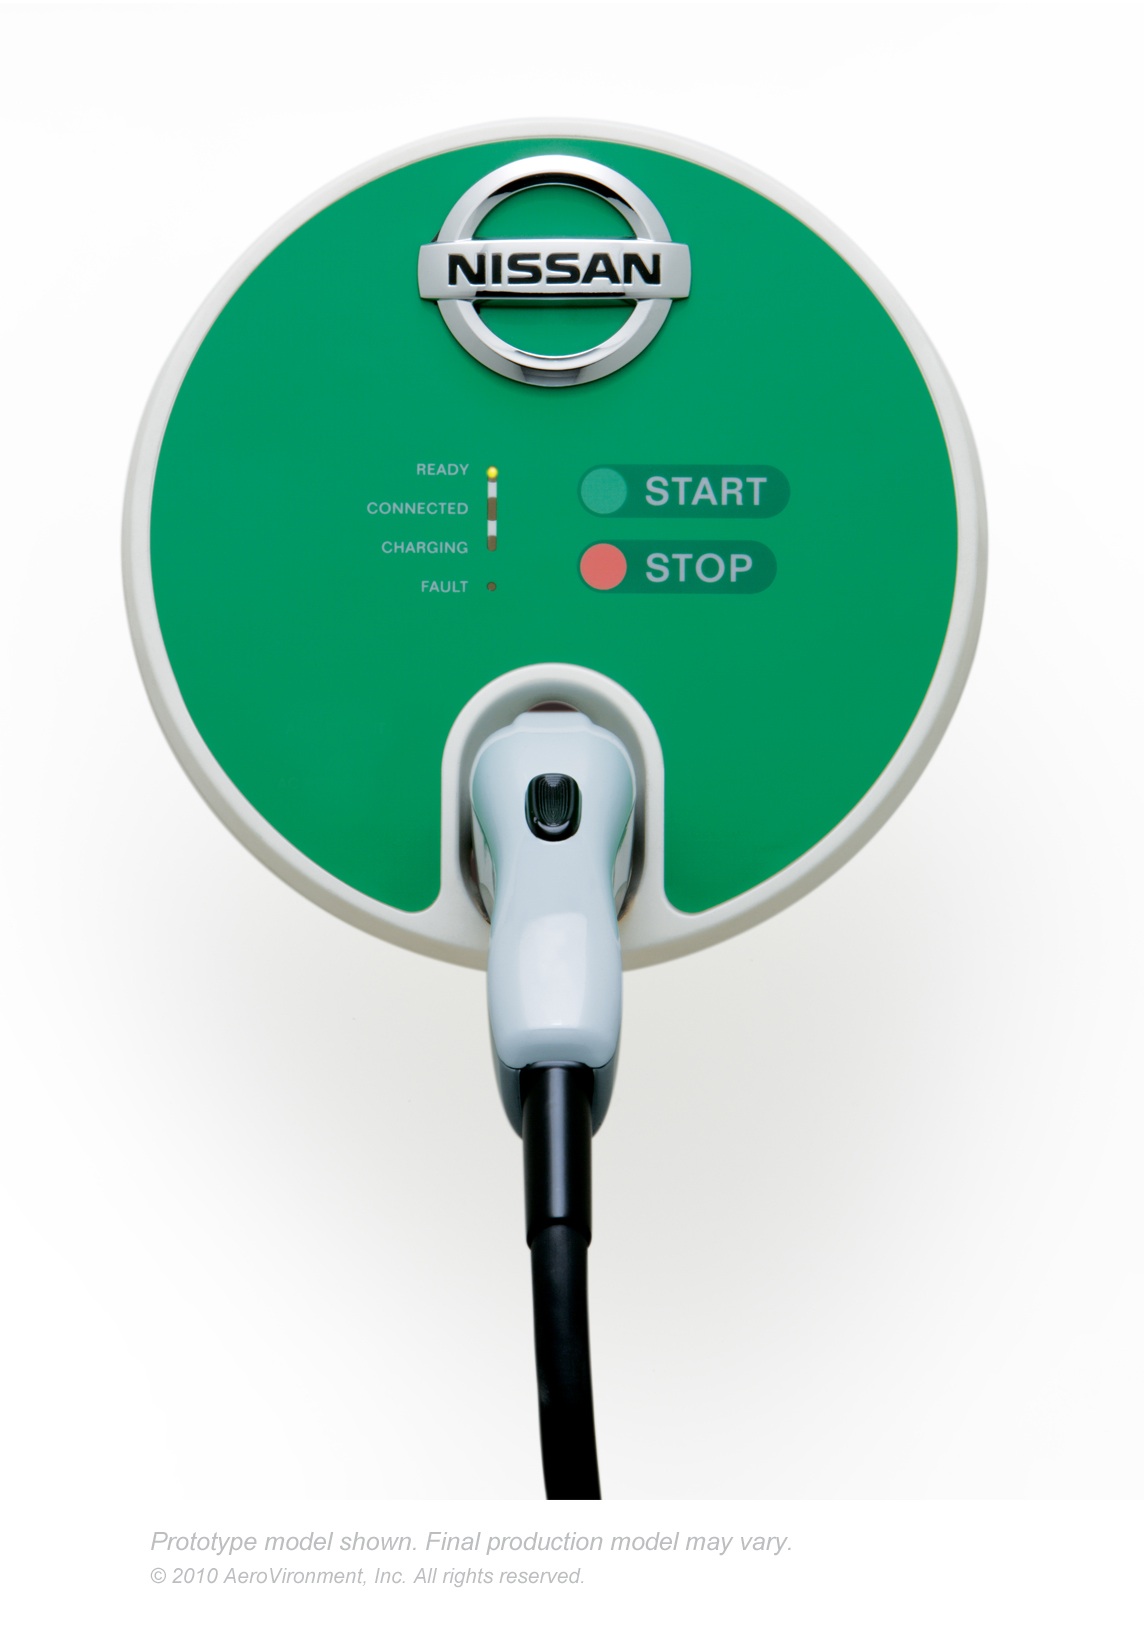 Nissan Selects AeroVironment for LEAF HomeCharging Stations